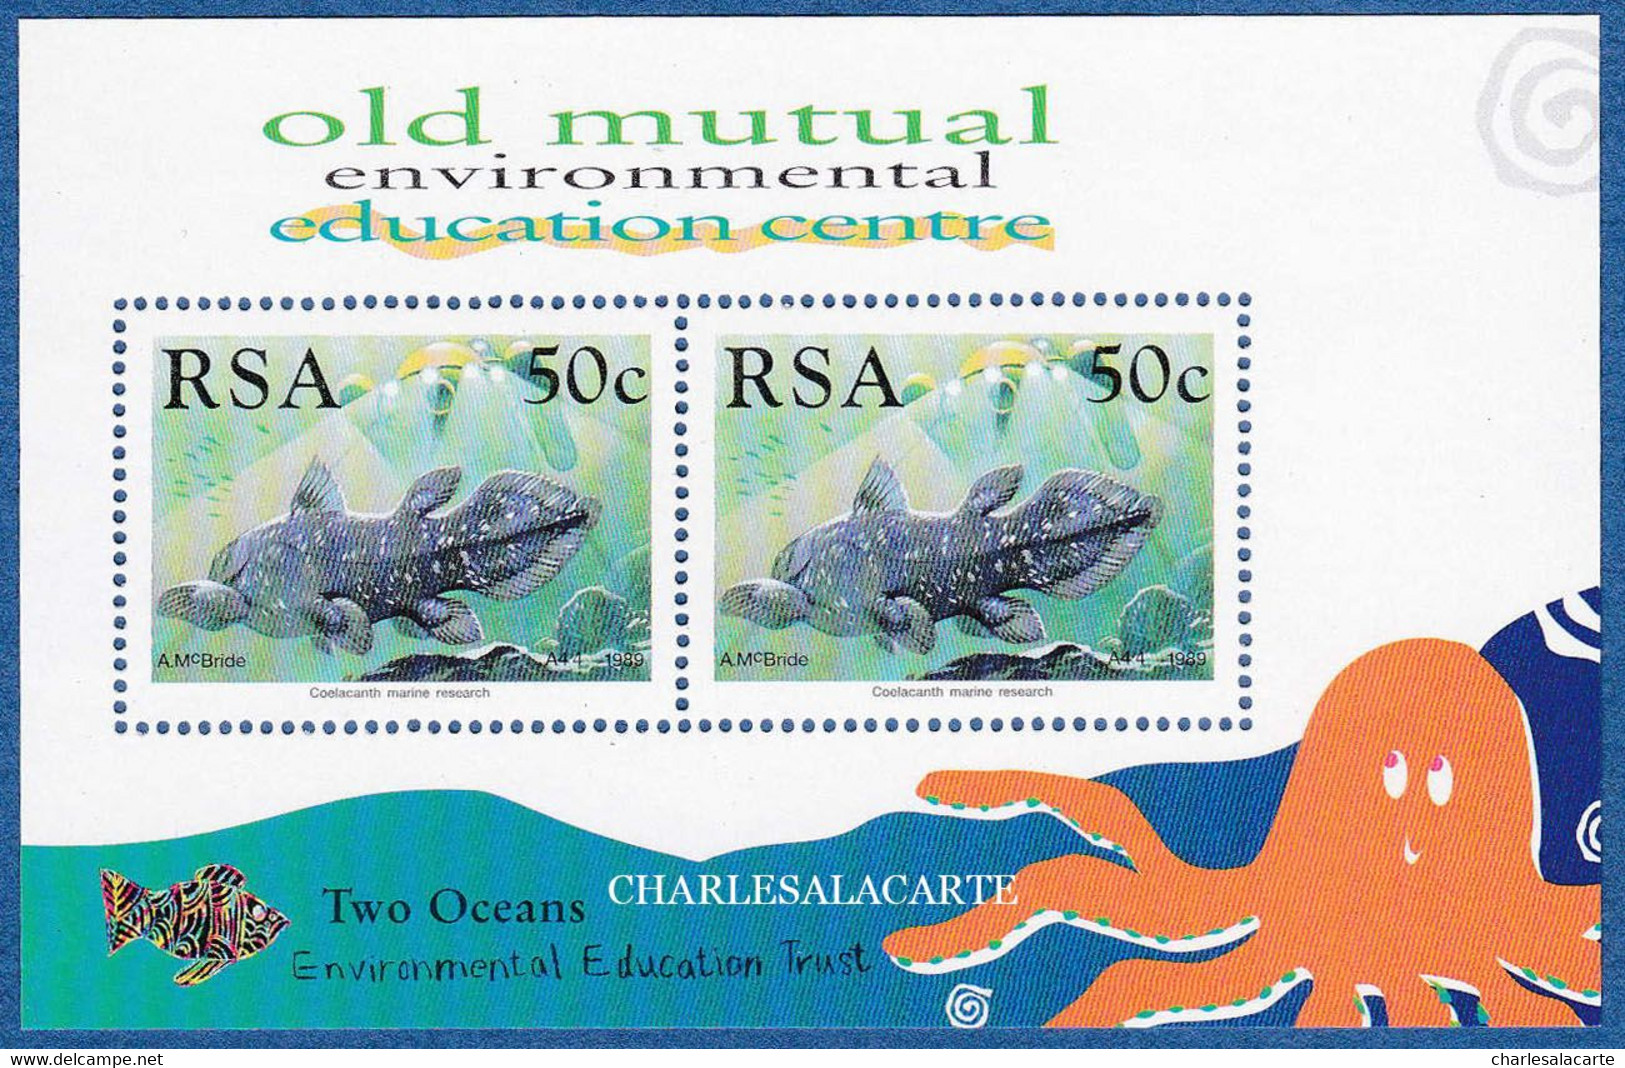 SOUTH AFRICA  1989  COELACANTH DISCOVERY M.S. OLD MUTUEL  S.G. 680 (2) M.S.  U.M. - Hojas Bloque